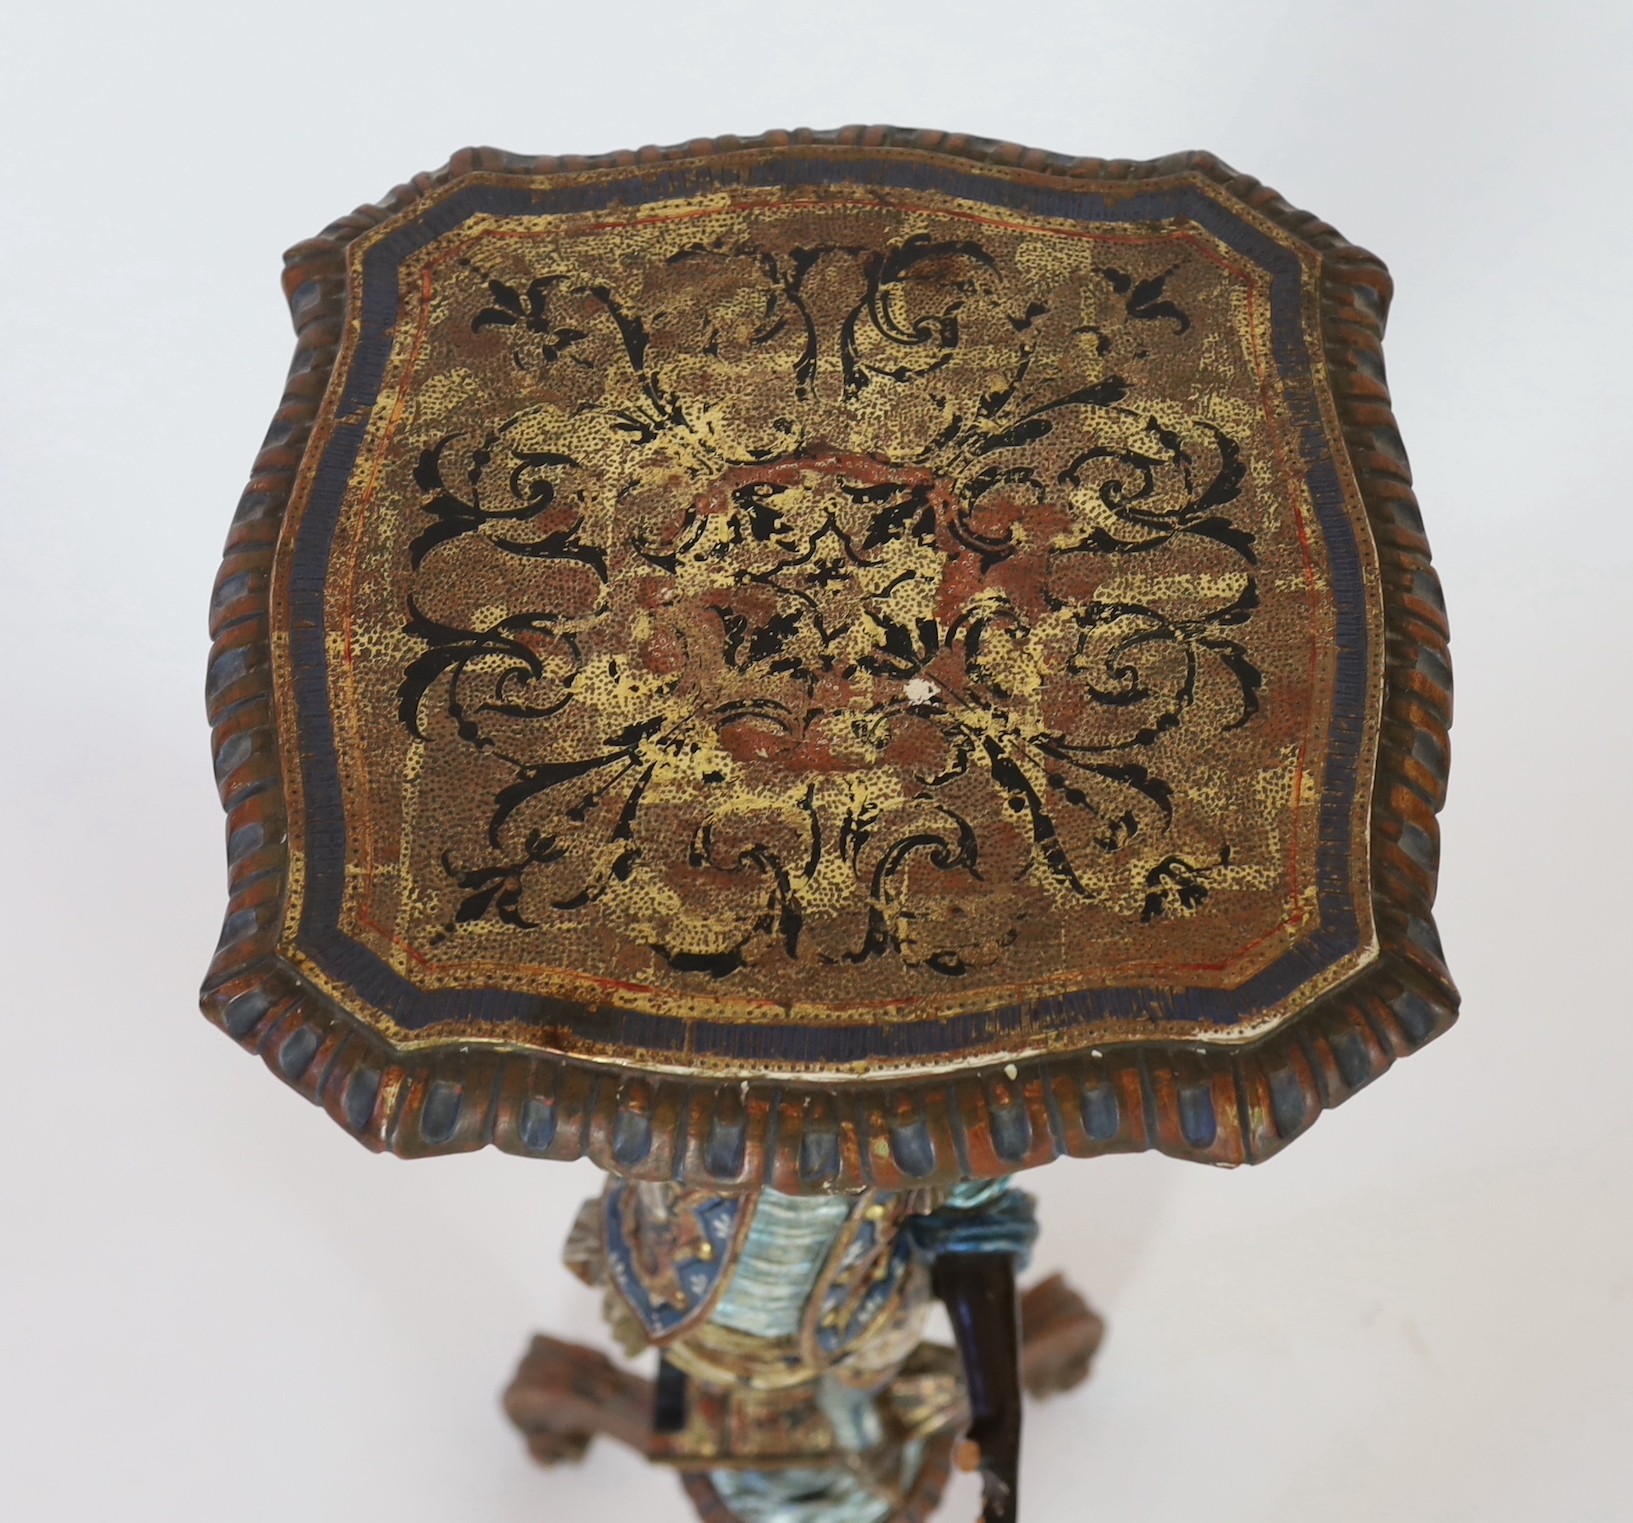 A 19th century Venetian carved wood and polychrome gondolier blackamoor table, width 33cm height 103cm